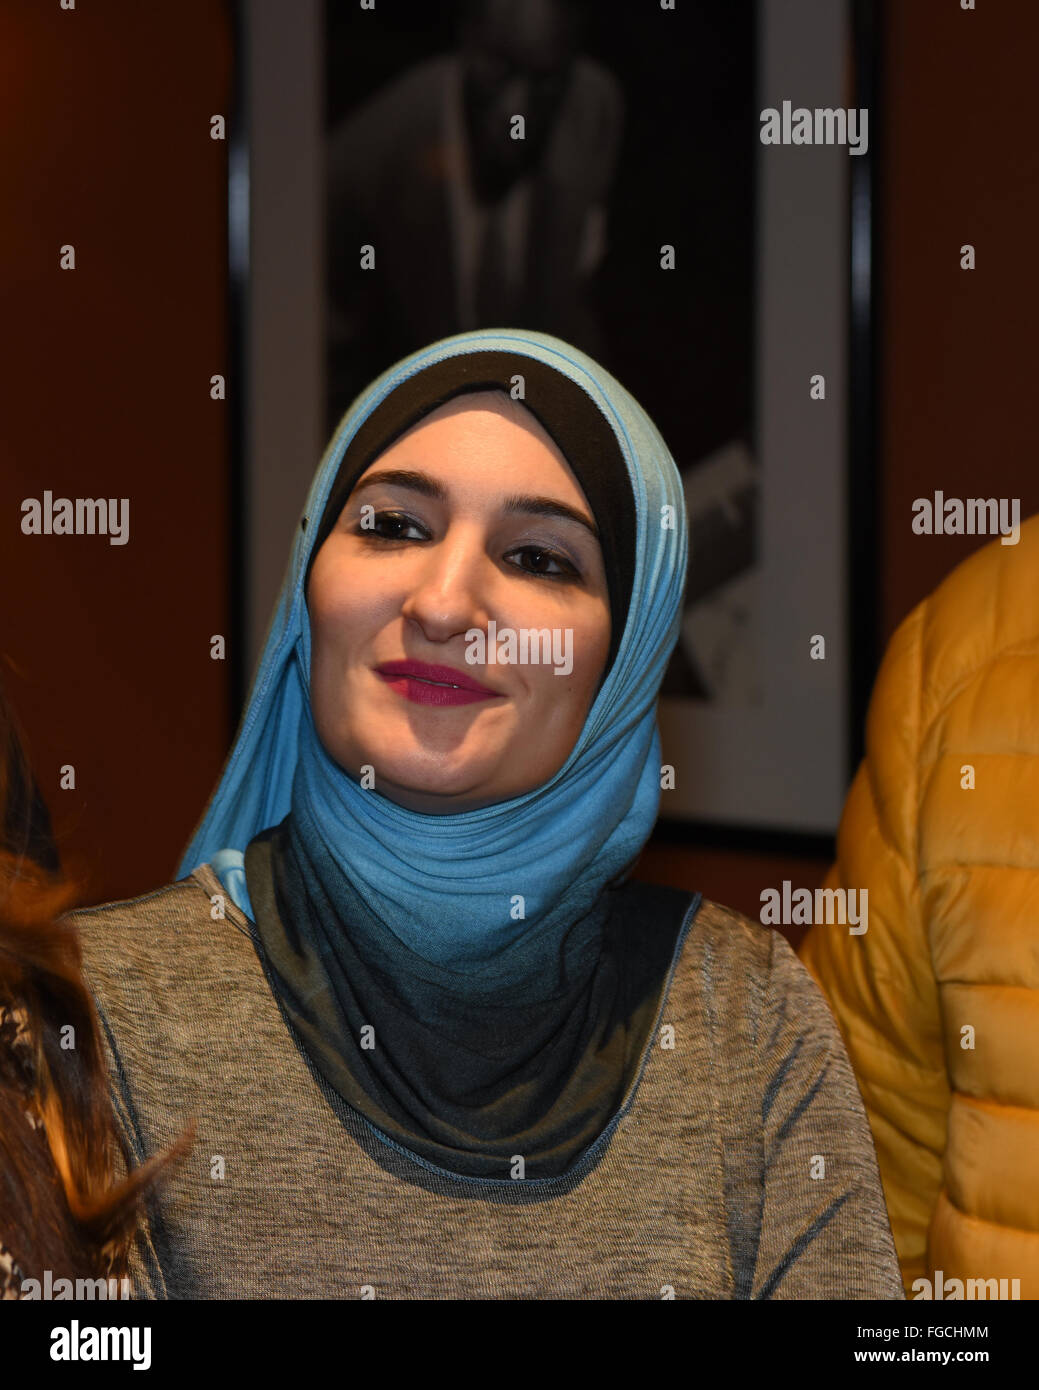 Arab American Association of NY President Linda Sarsour on hand to lend support. NYC first lady Chirlane McCray joined business and community leaders at Harlem's landmark restaurant, Sylvia's, to collect supplies for hard-pressed resident of Flint, MI. (Photo by Andy Katz / Pacific Press) Stock Photo